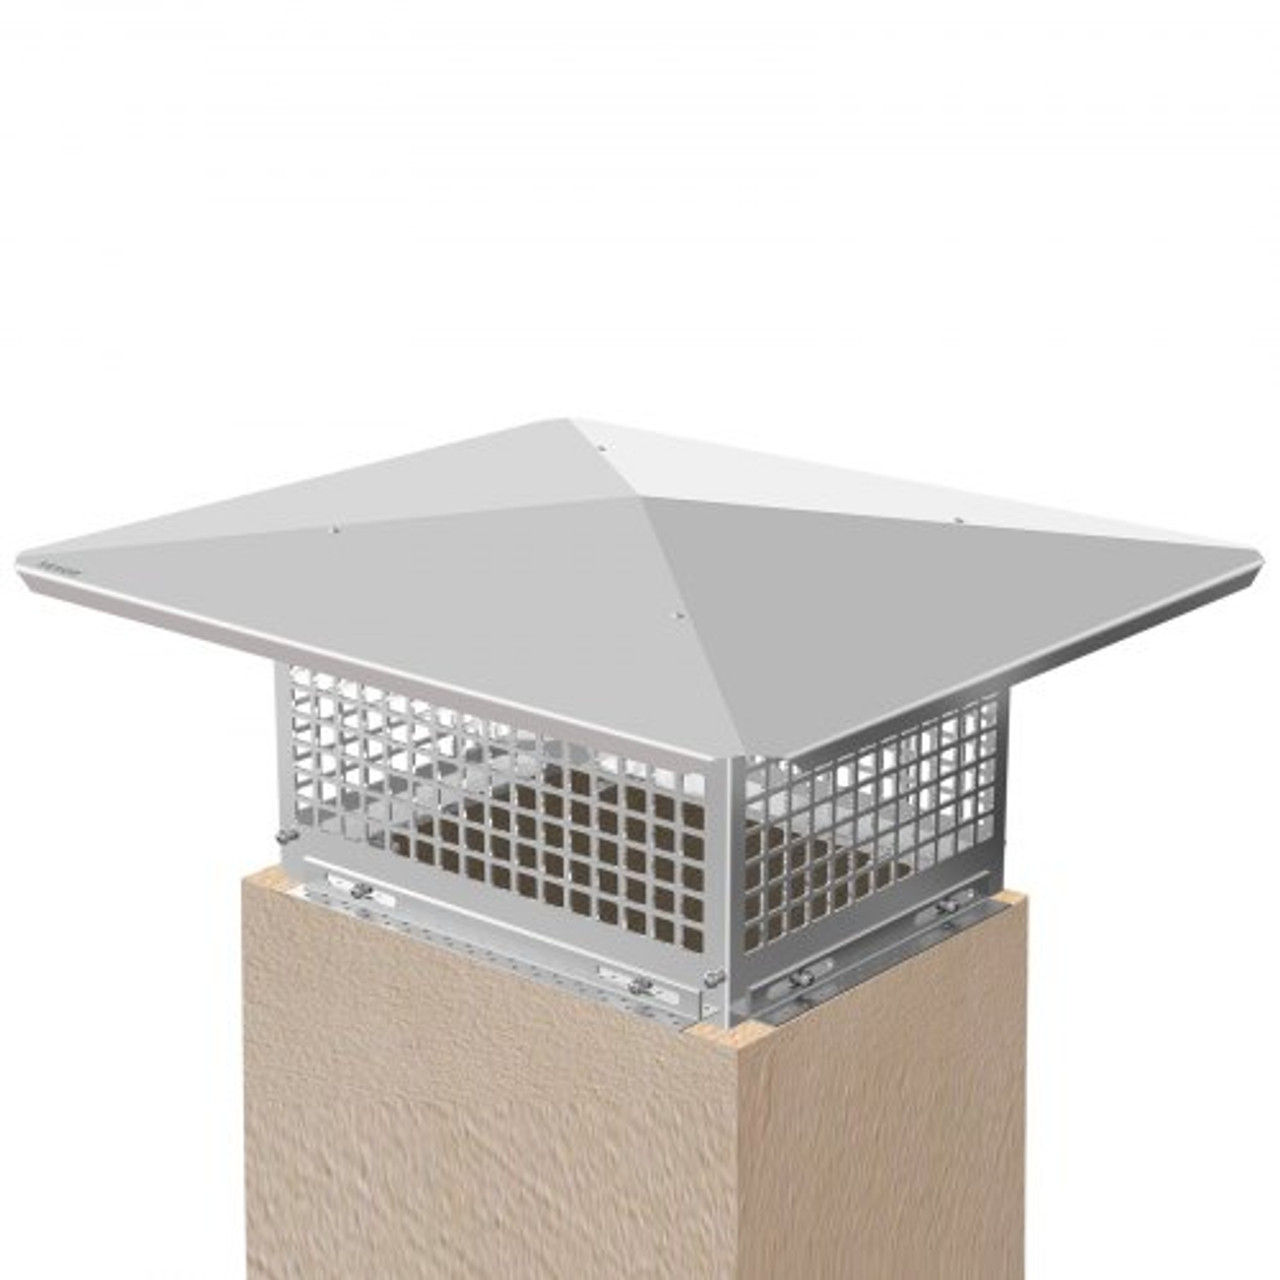 Chimney Cap, 17" x 21" Flue Caps, 304 Stainless Steel Fireplace Chimney Cover, Adjustable Metal Spark Arrestor with Bolts Screws, Mesh Chimney Flue Cover for Outside Existing Clay Flue Tile